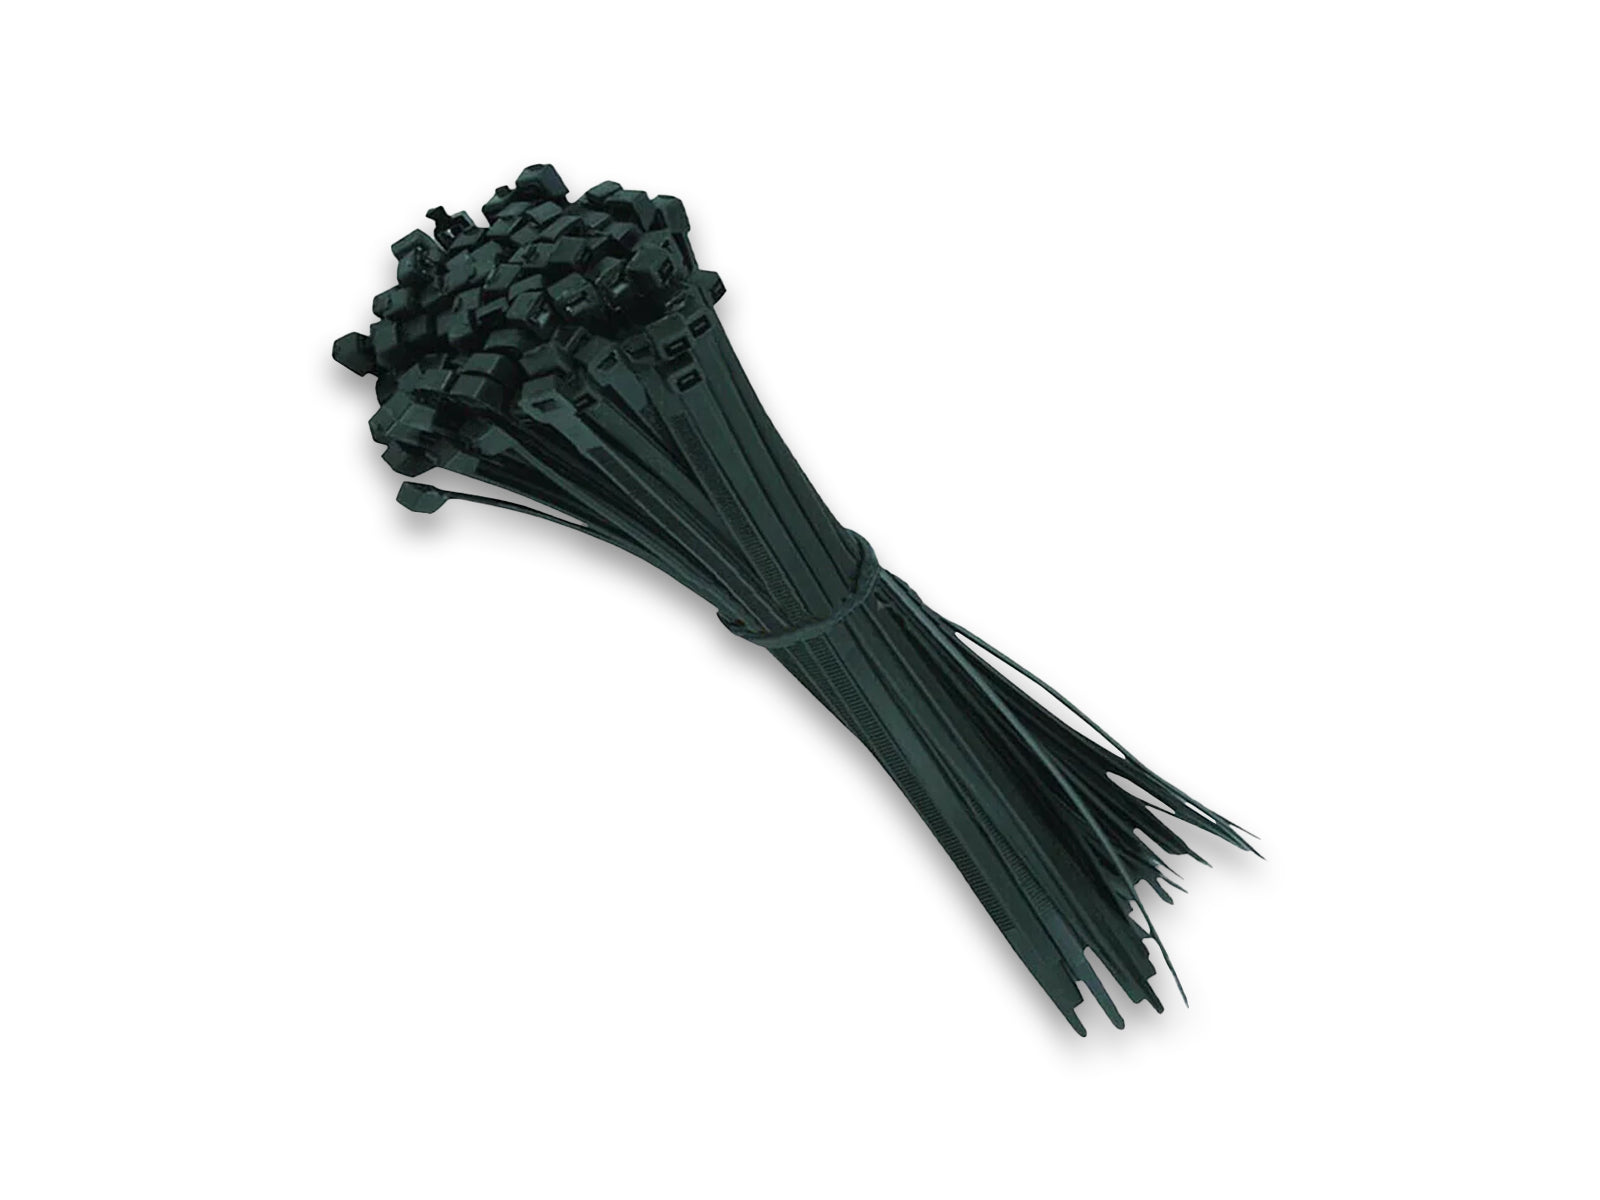 Image-of-the-black-cable-ties-on-the-white-background